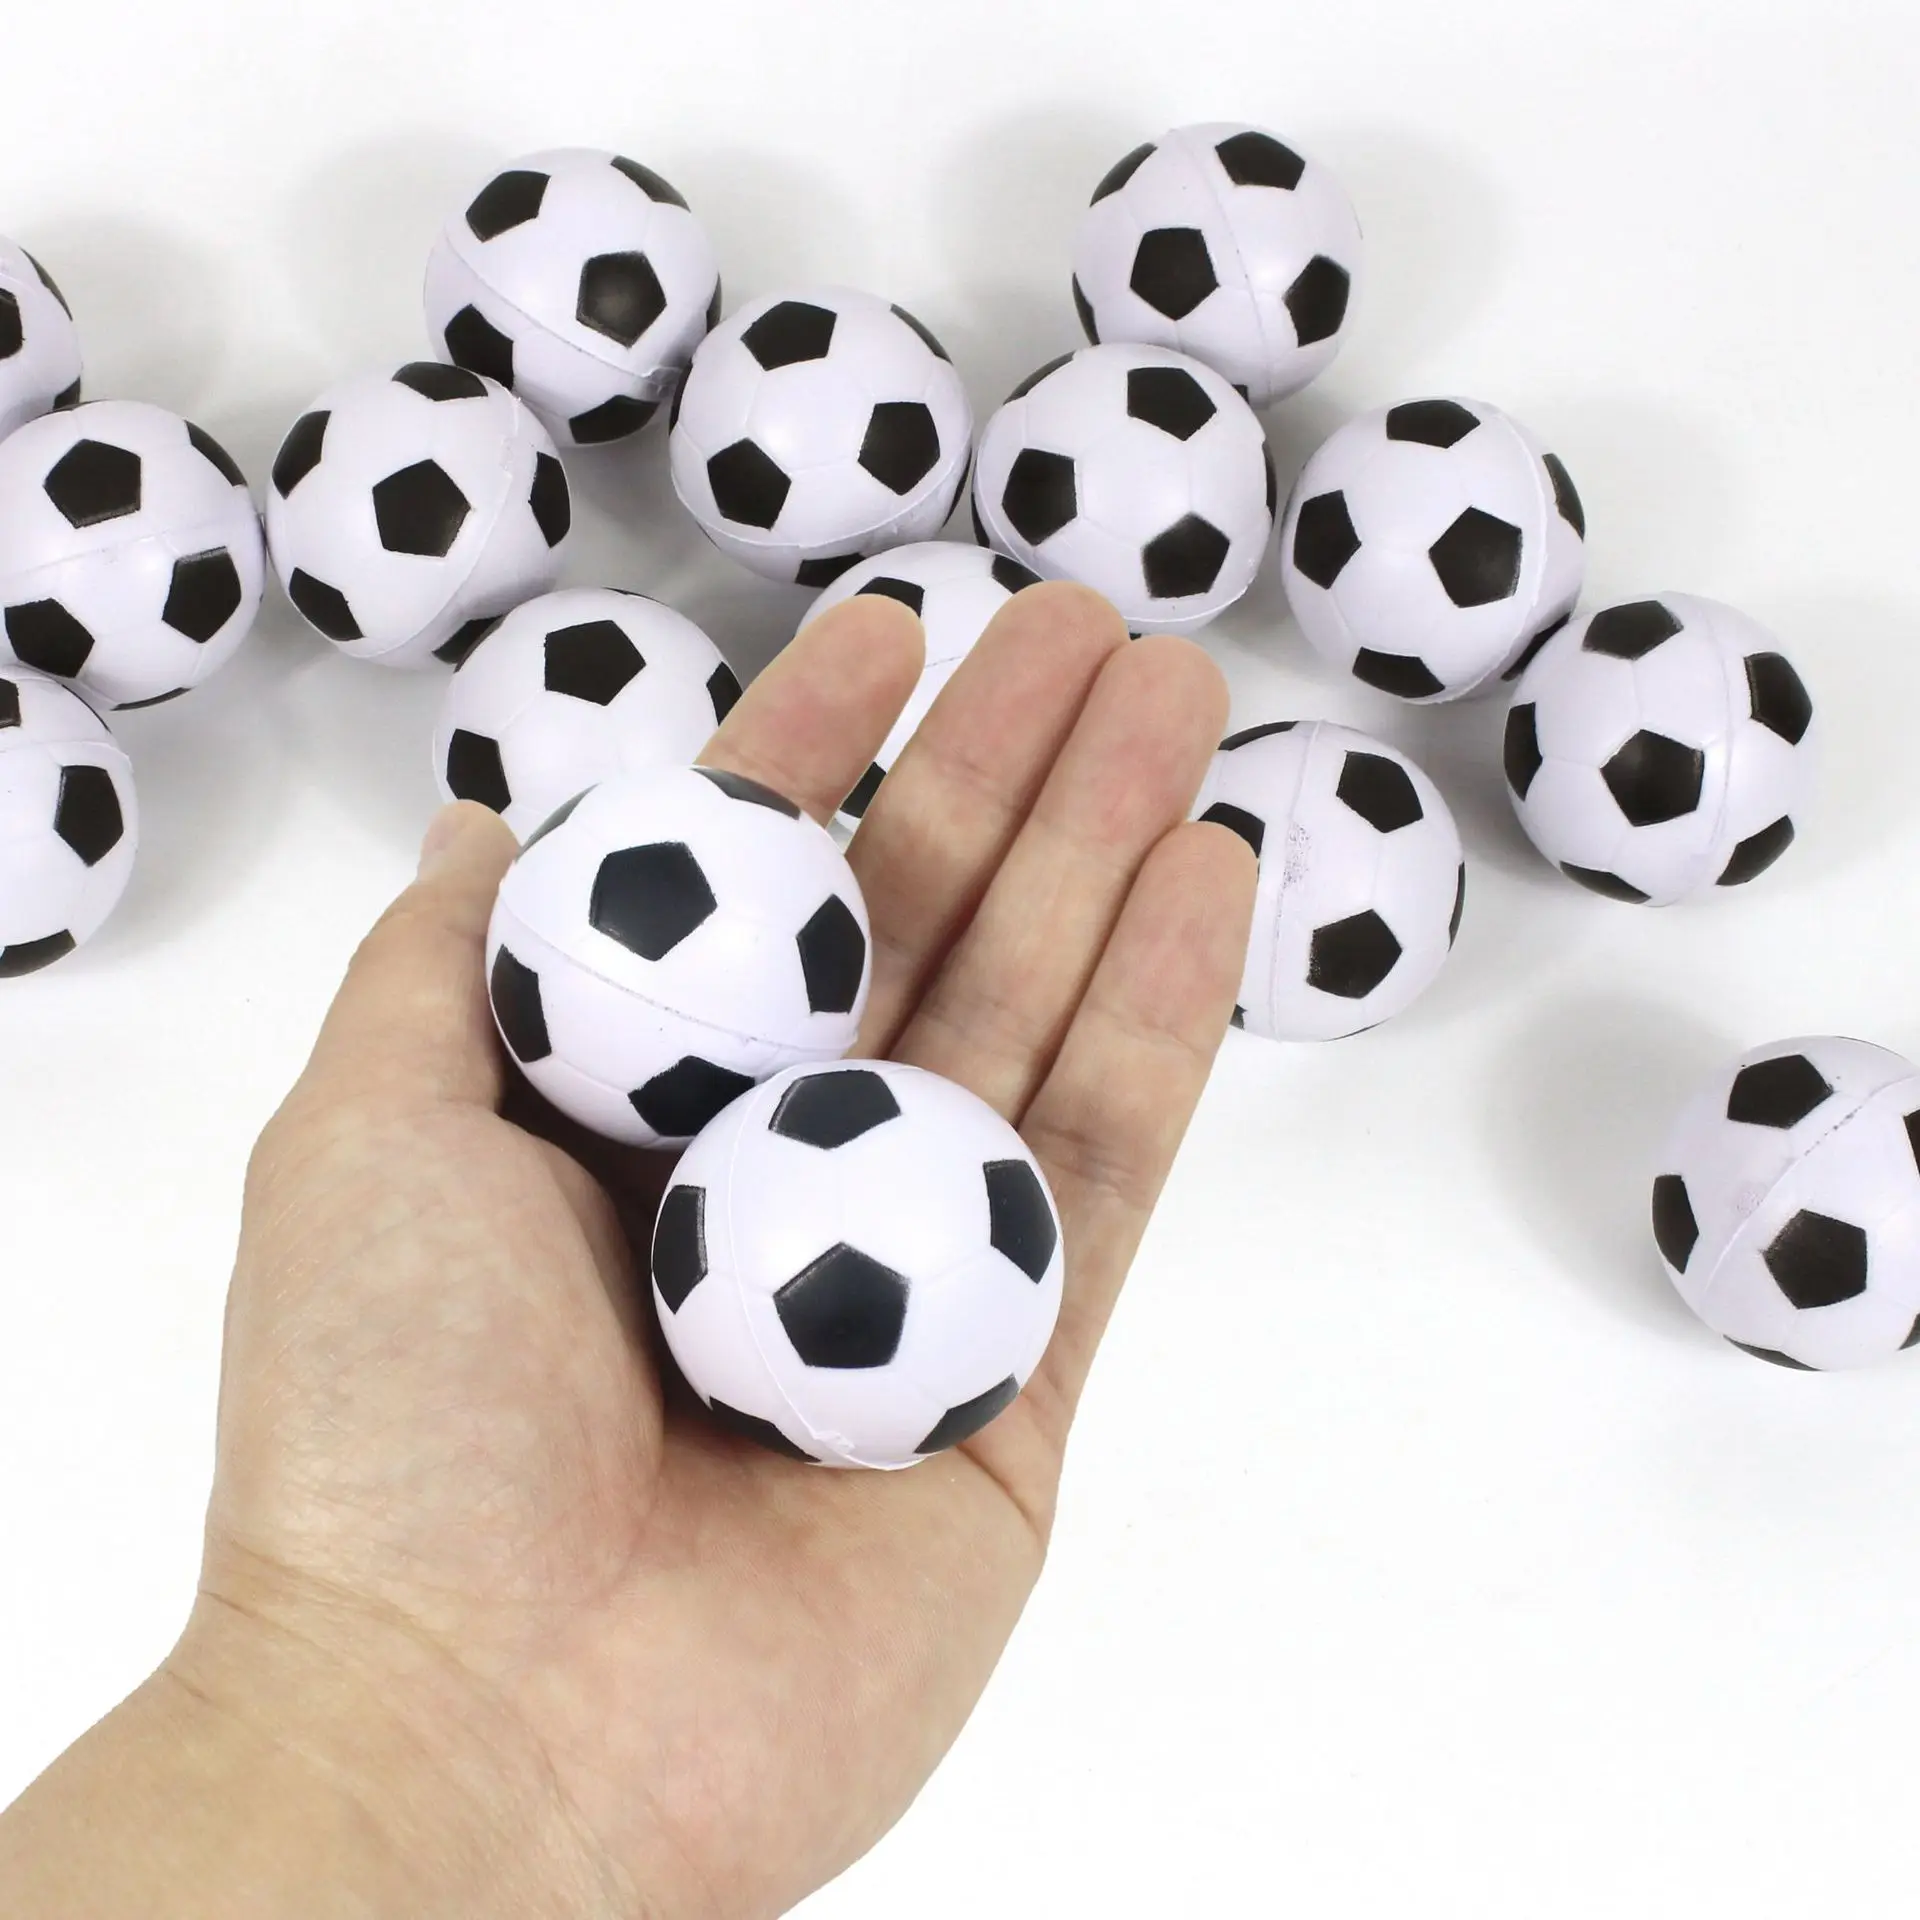 Funny Toy Balls 4CM Football Bouncy Balls Jumping Solid Elastic Rubber Balls Kids Boys Happy Soccer Theme Birthday Party Decors